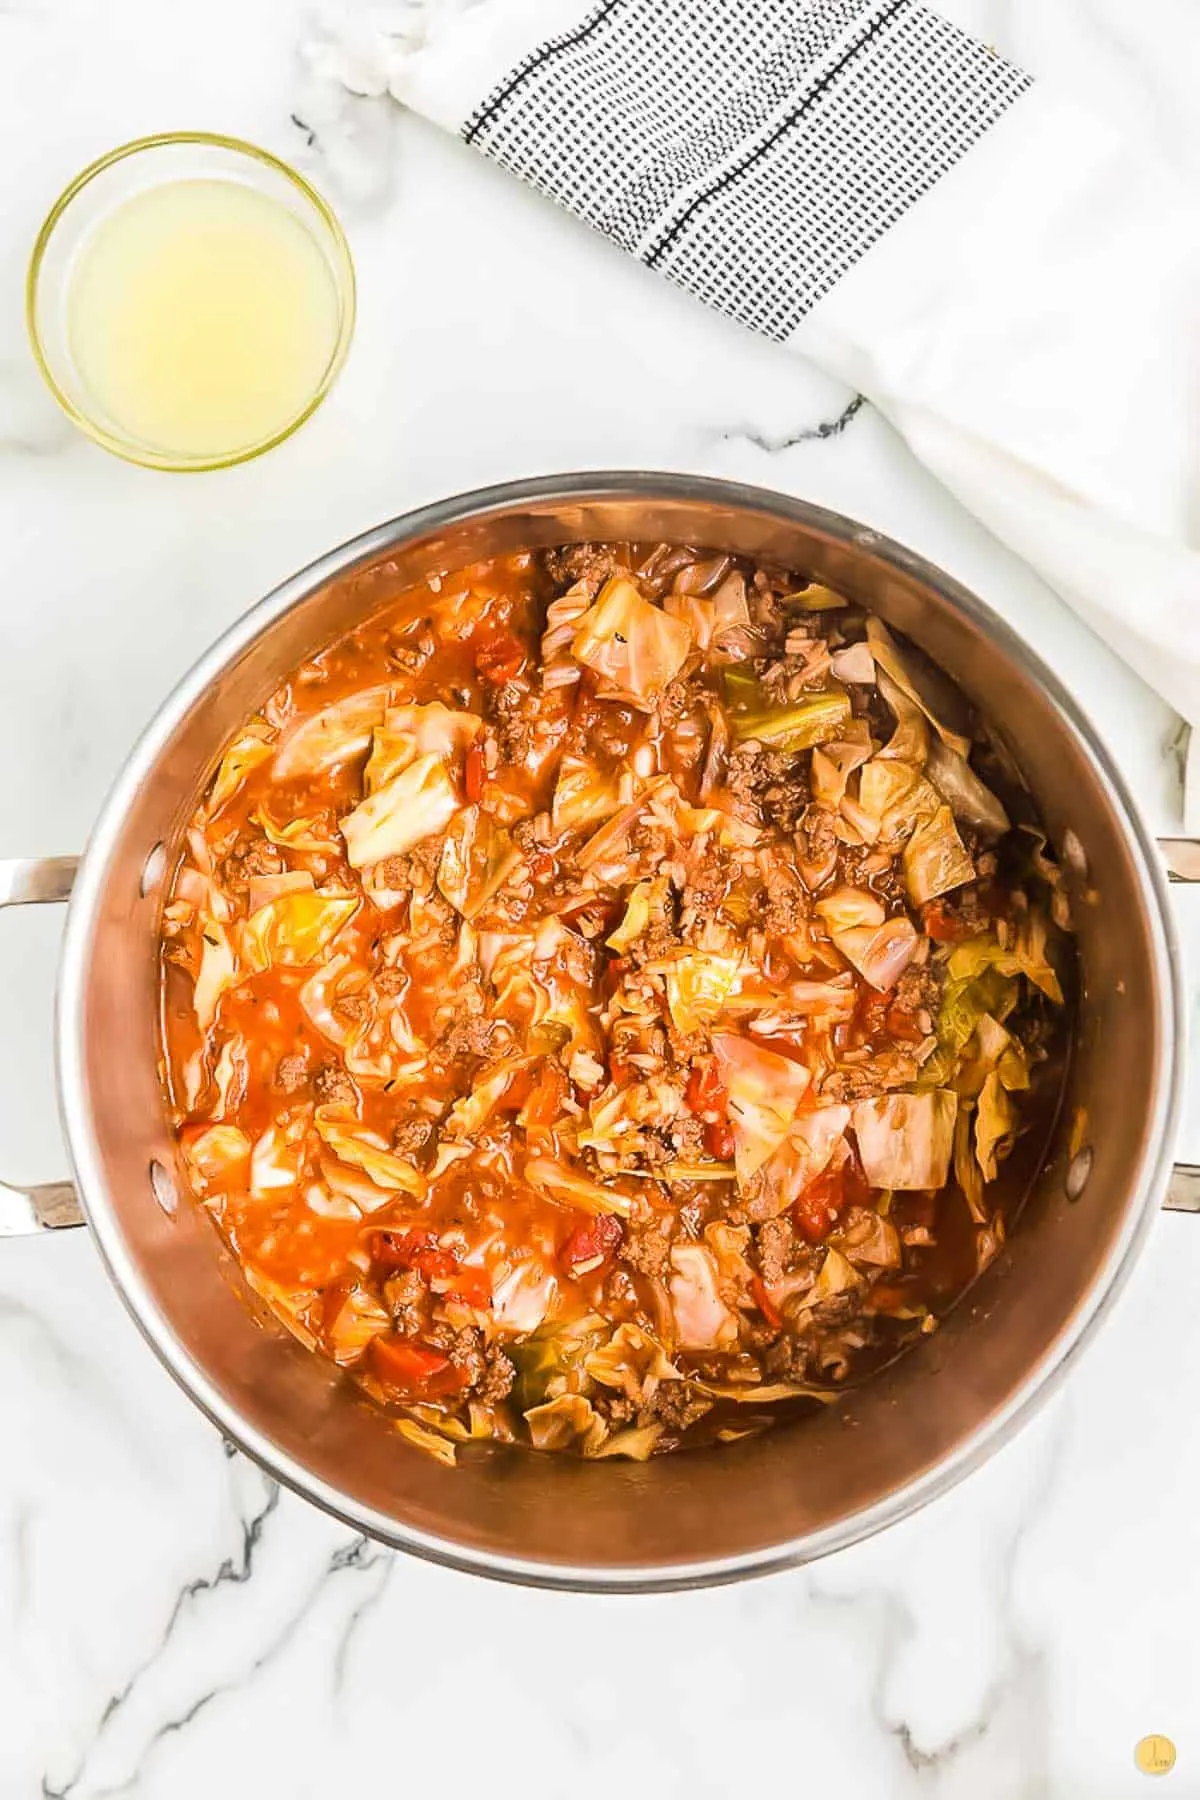 a hearty meal of cabbage rolls in soup form